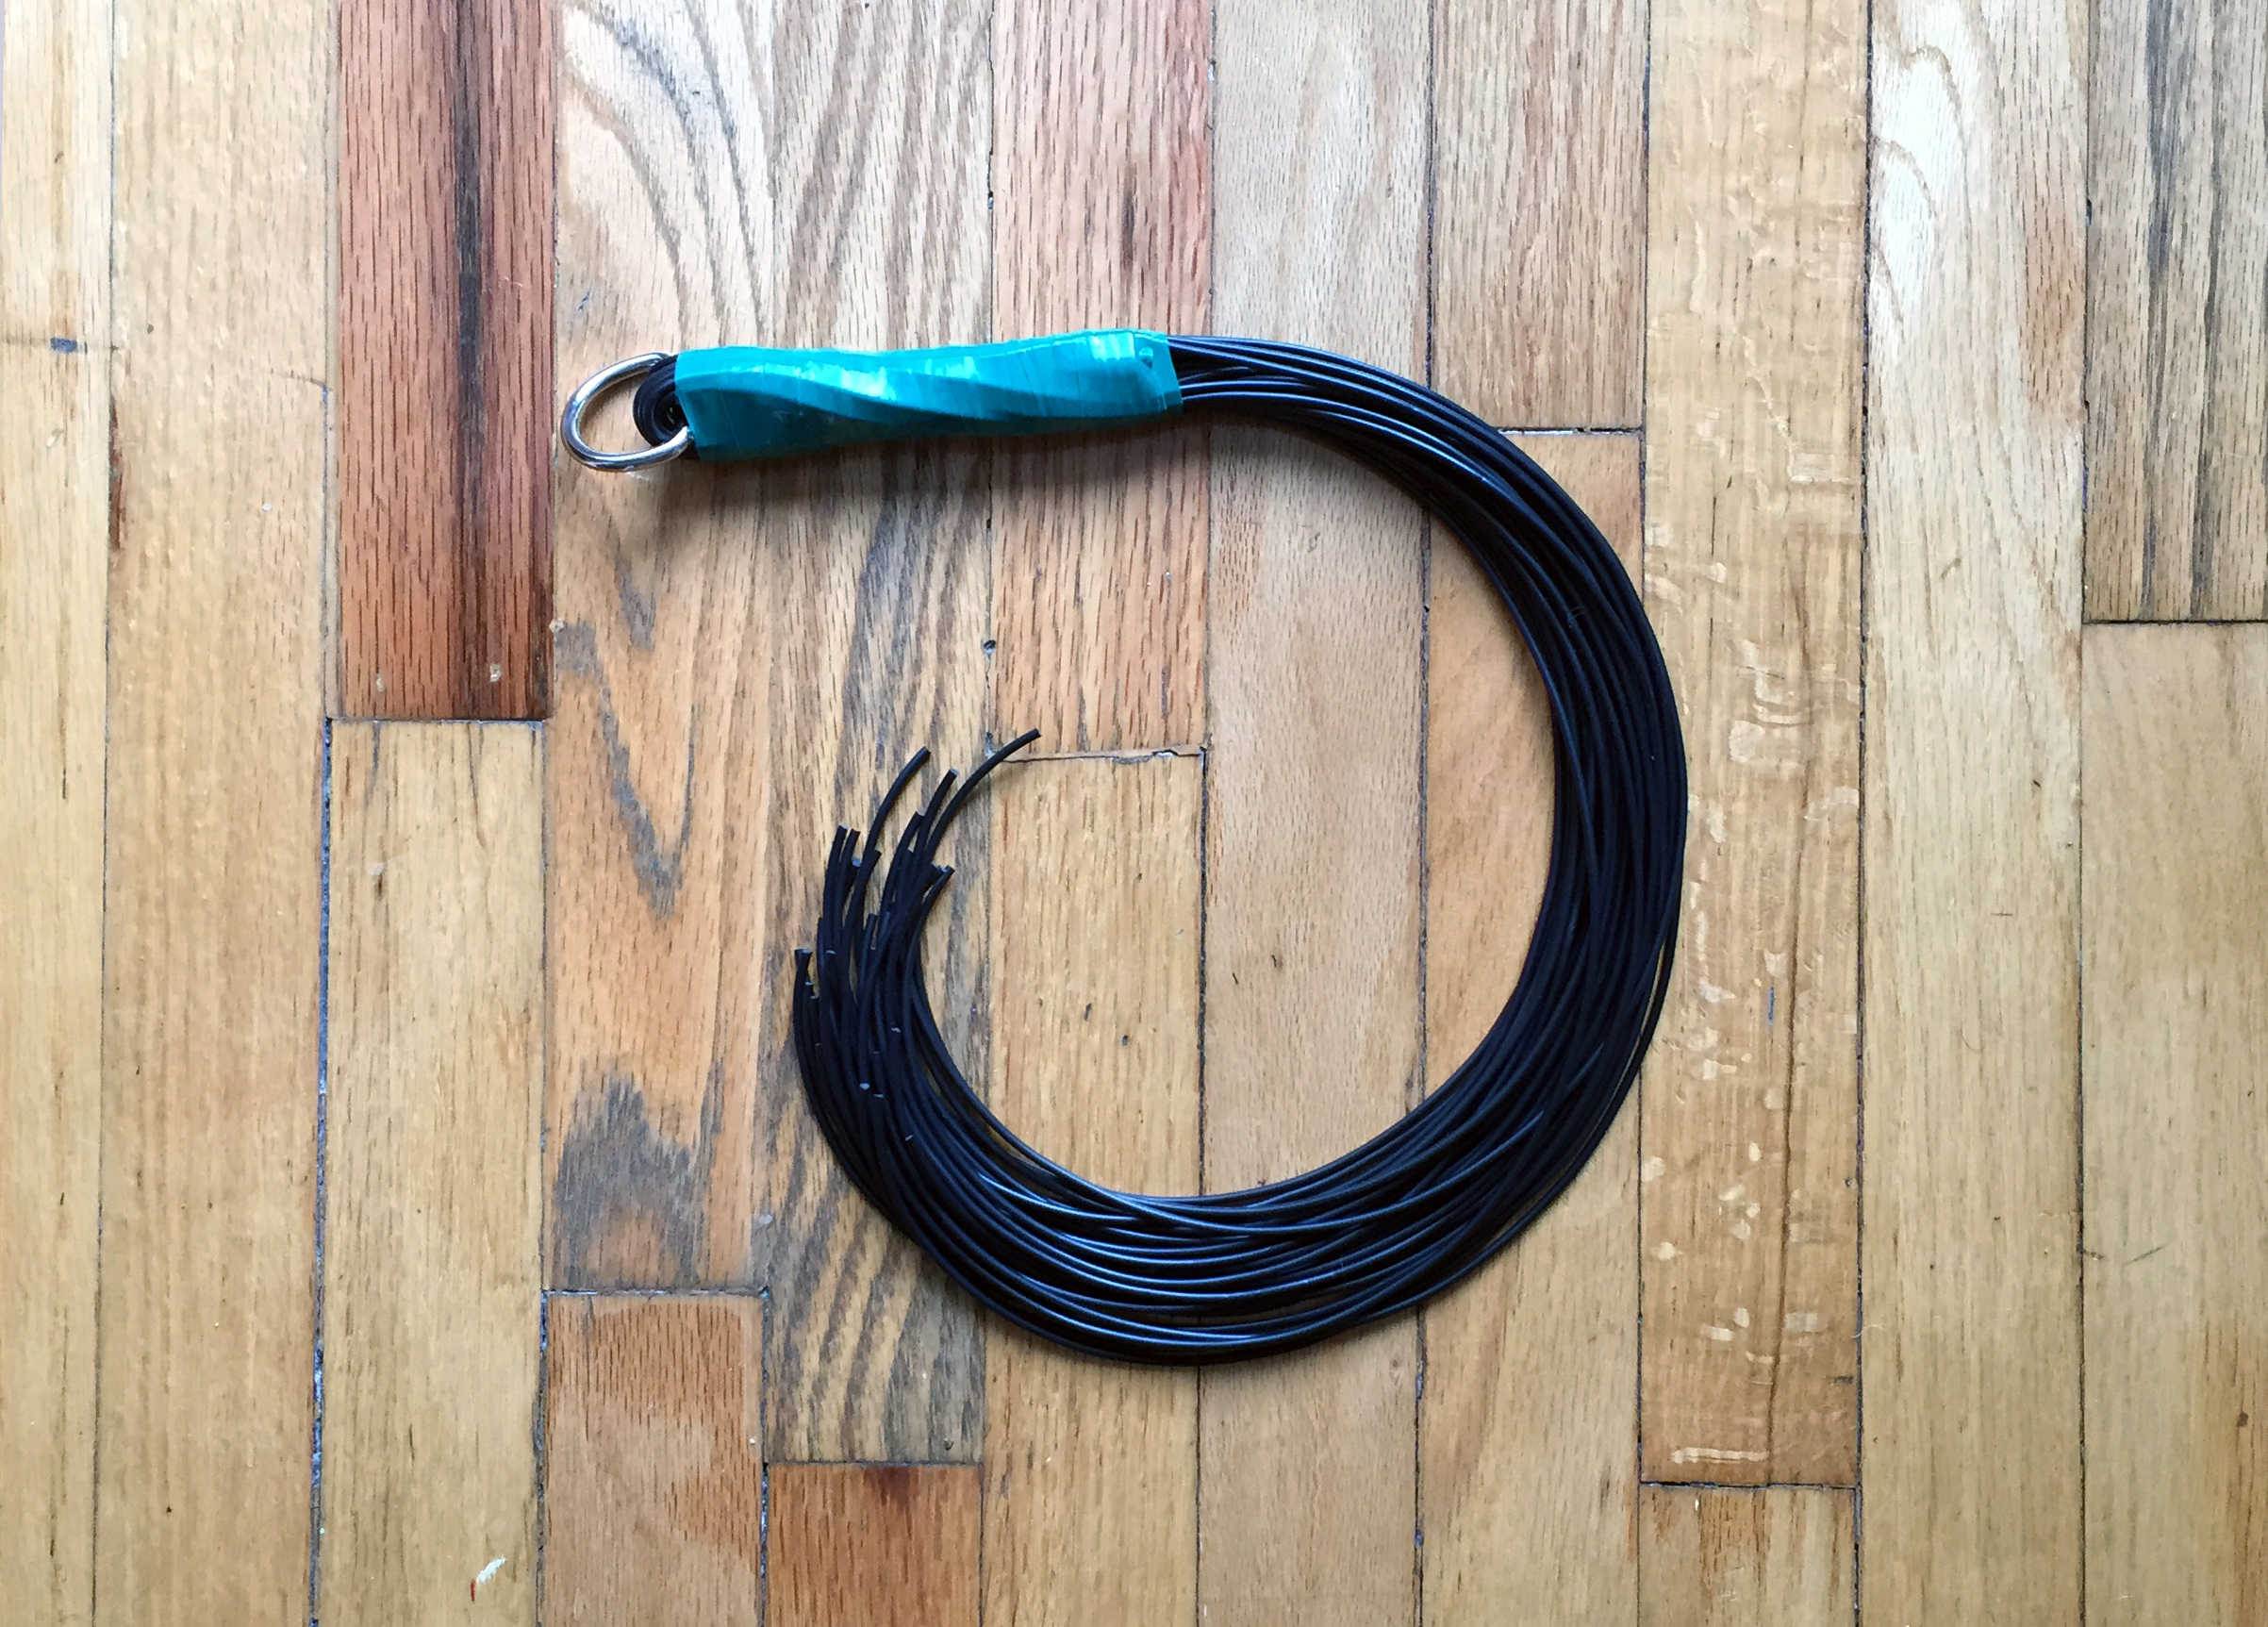 How To Make Your Own Flogger in About 15 Minutes